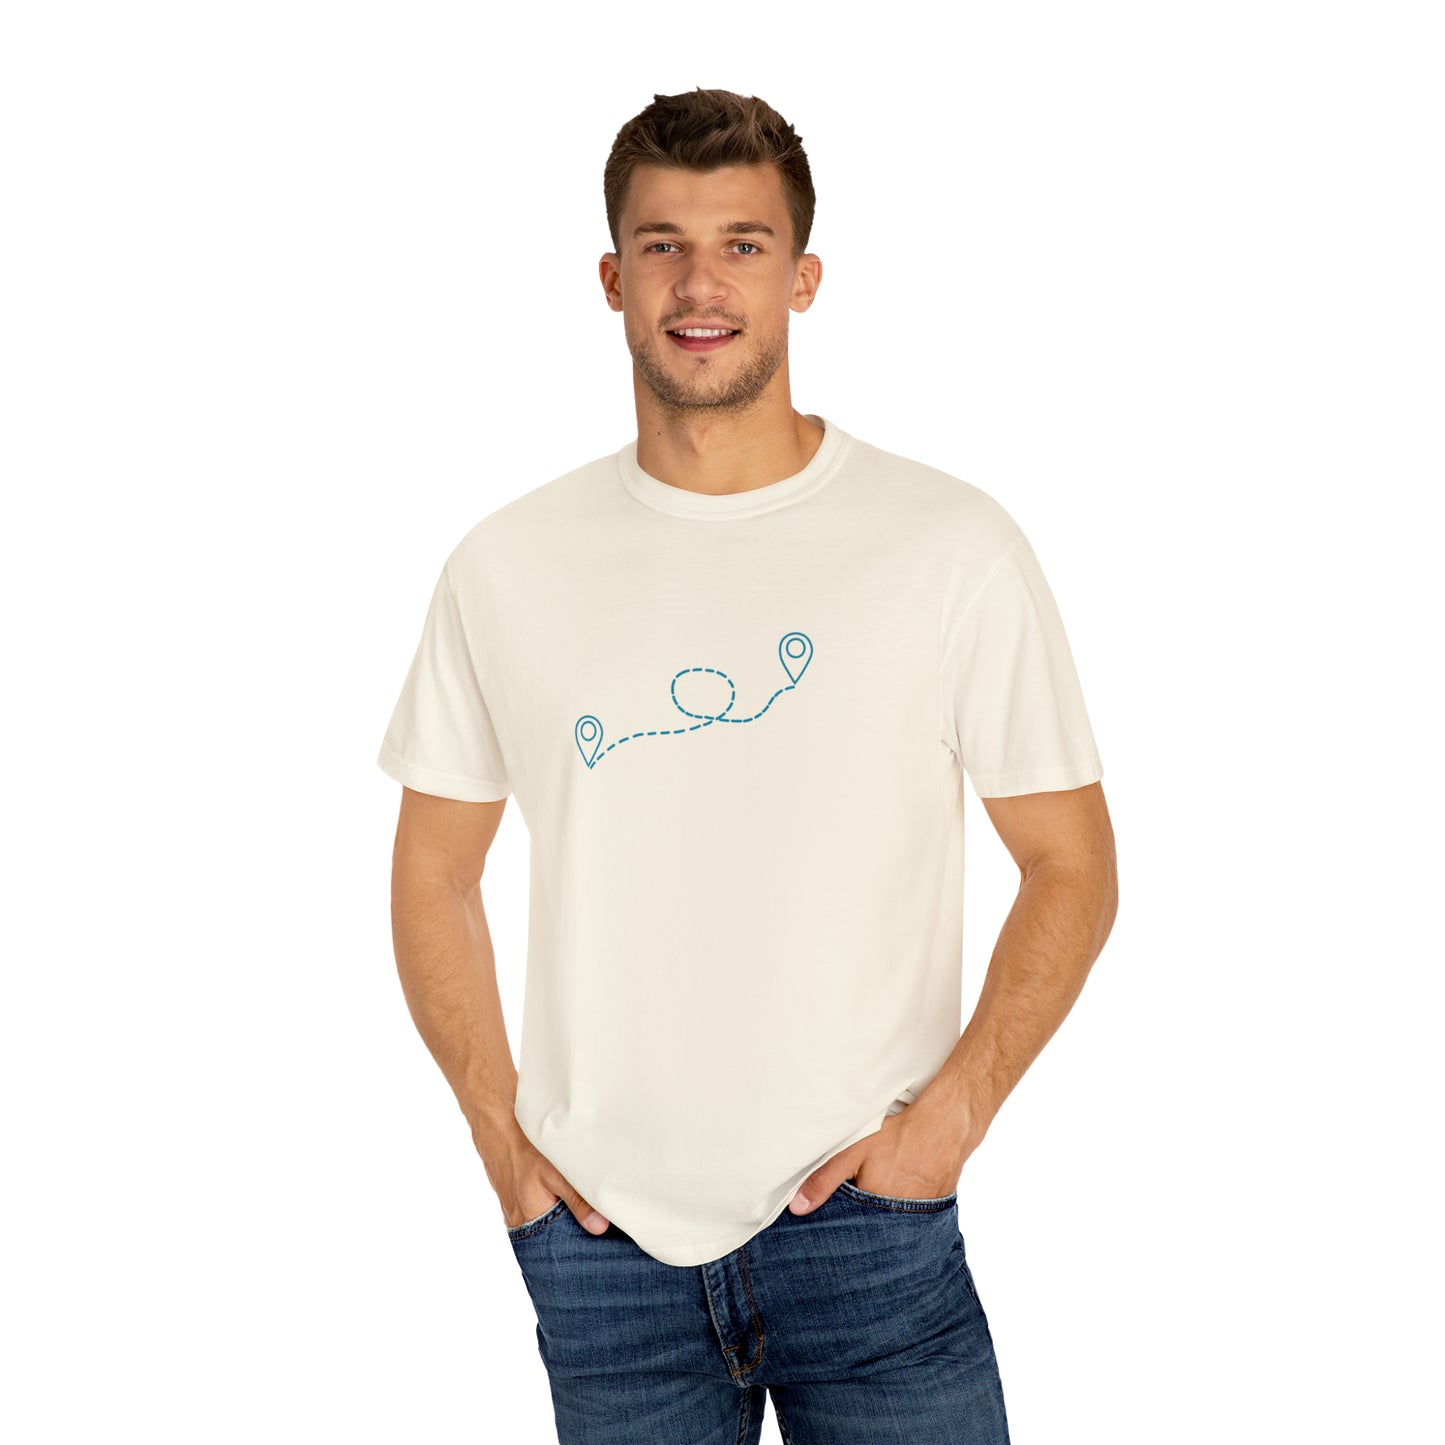 You'll Get There Eventually Location T-shirt